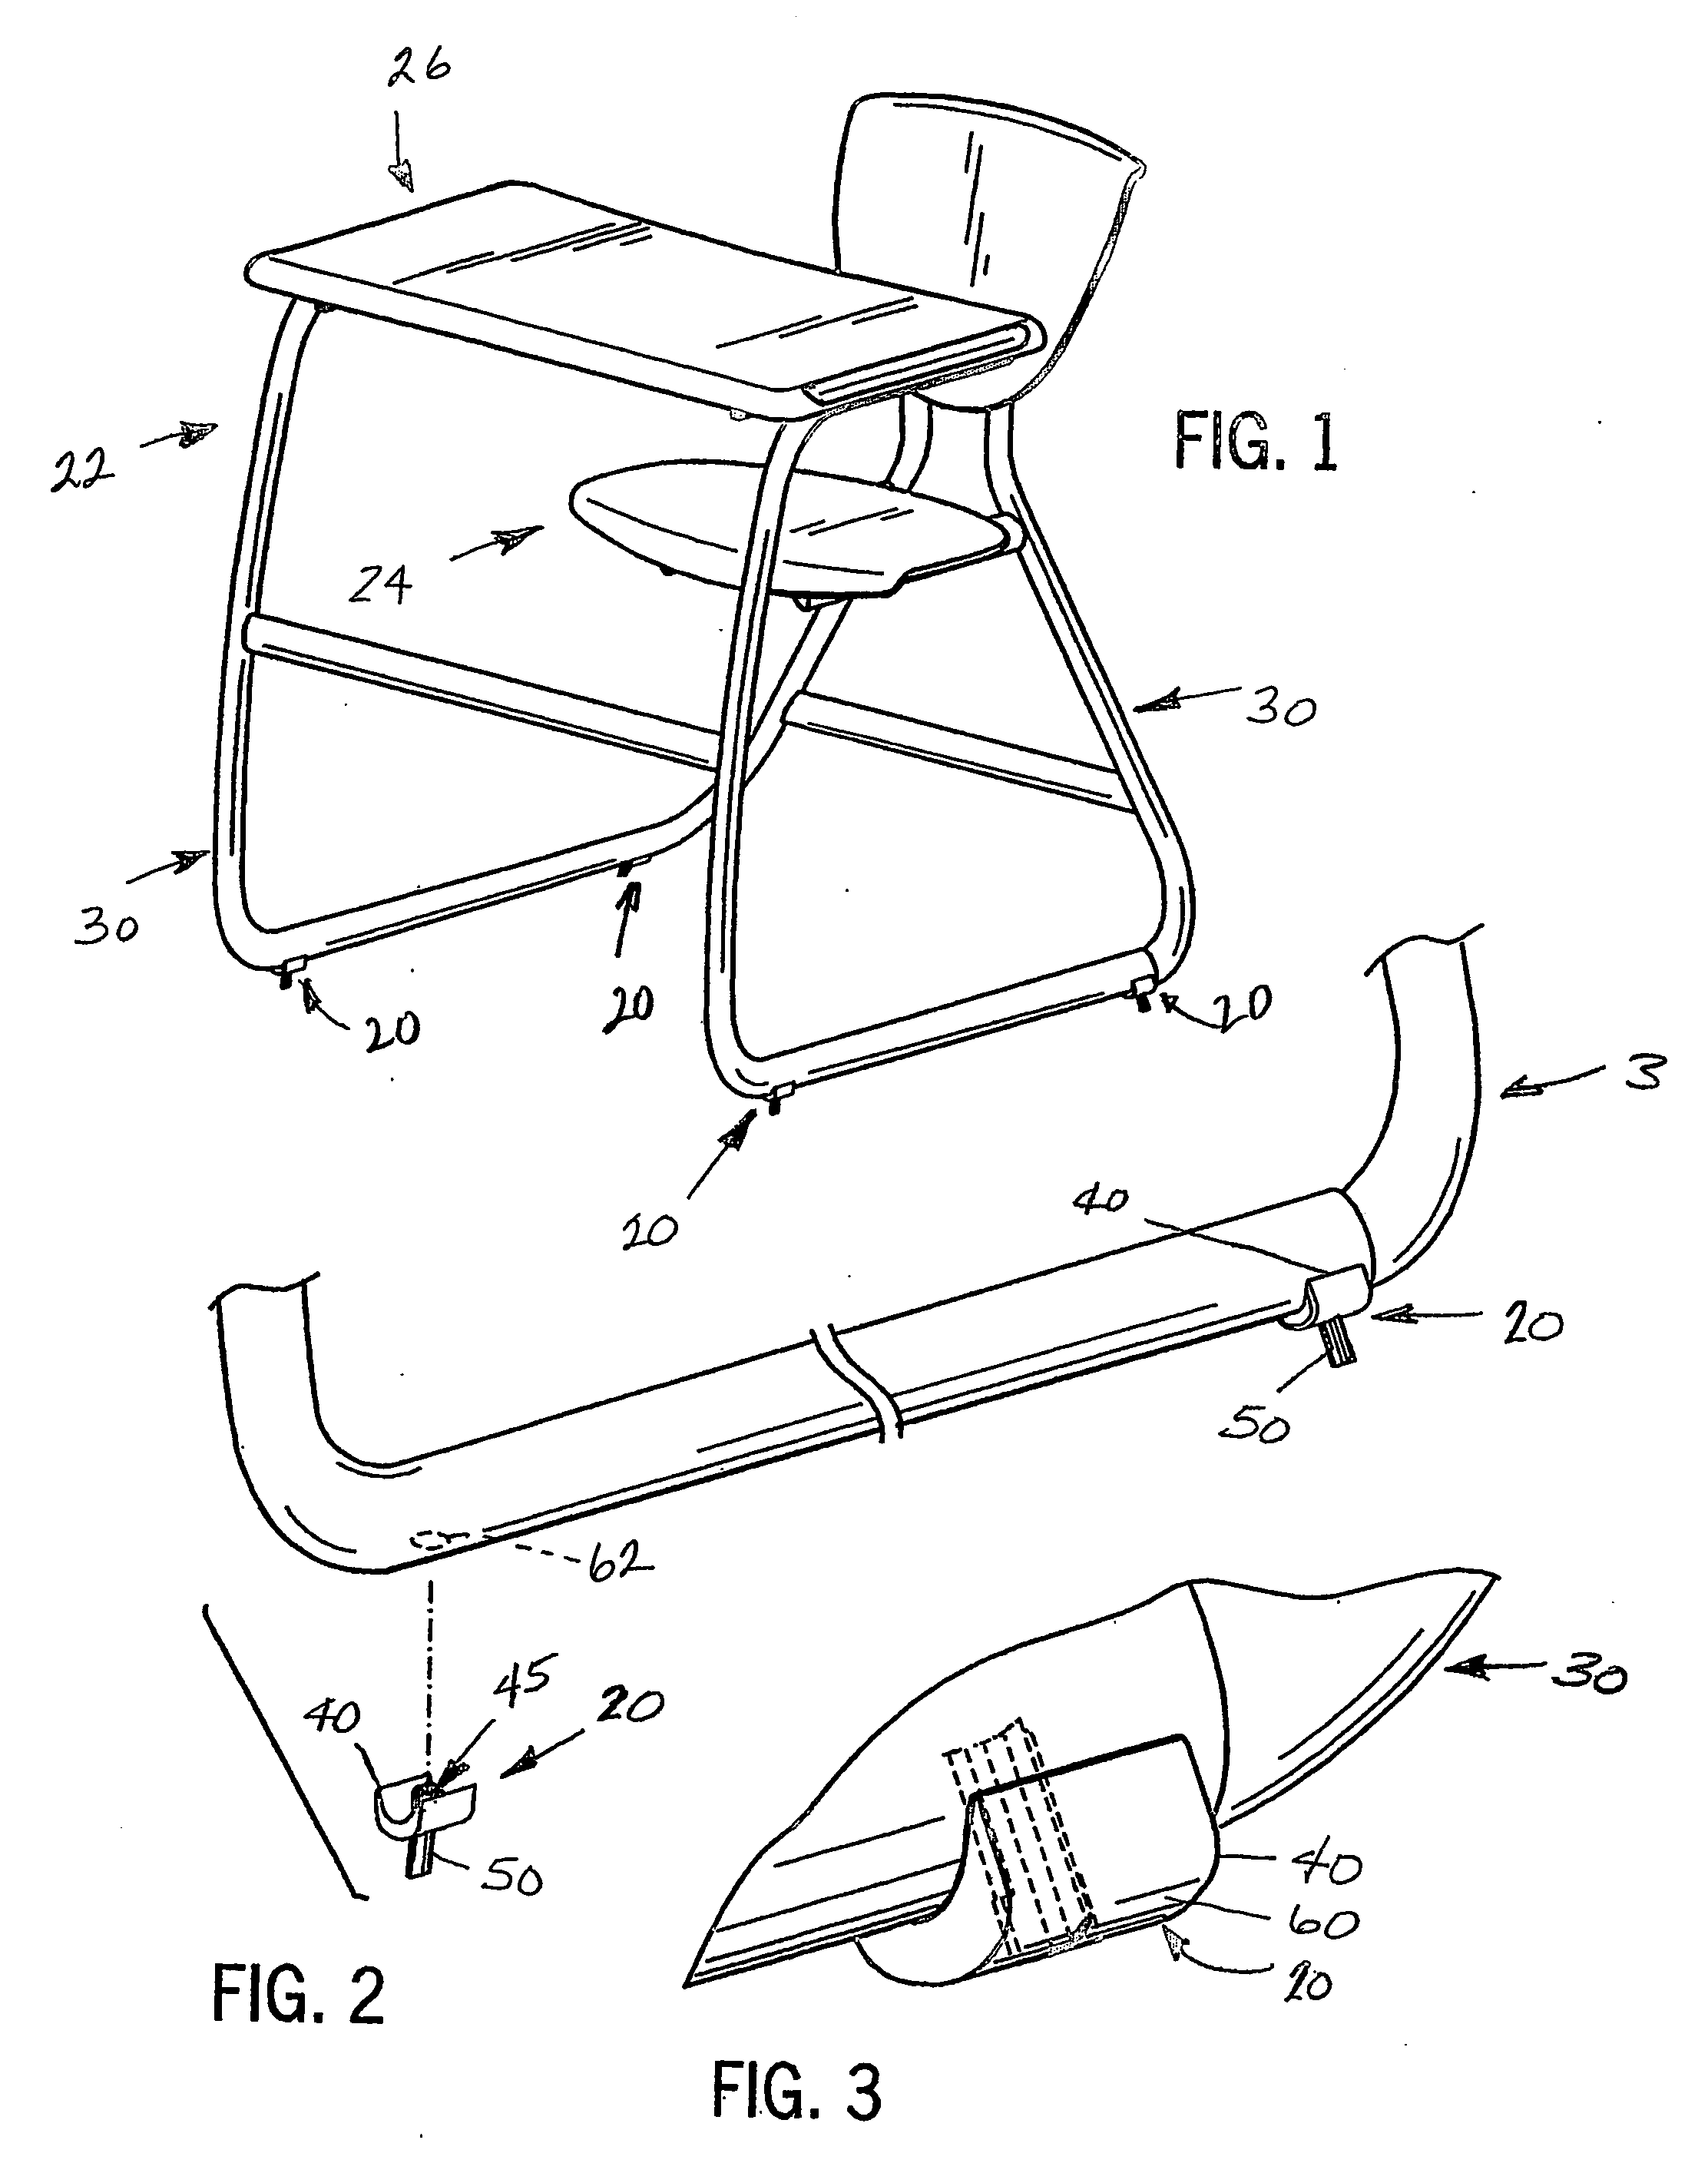 Pound-in glide for an article of furniture